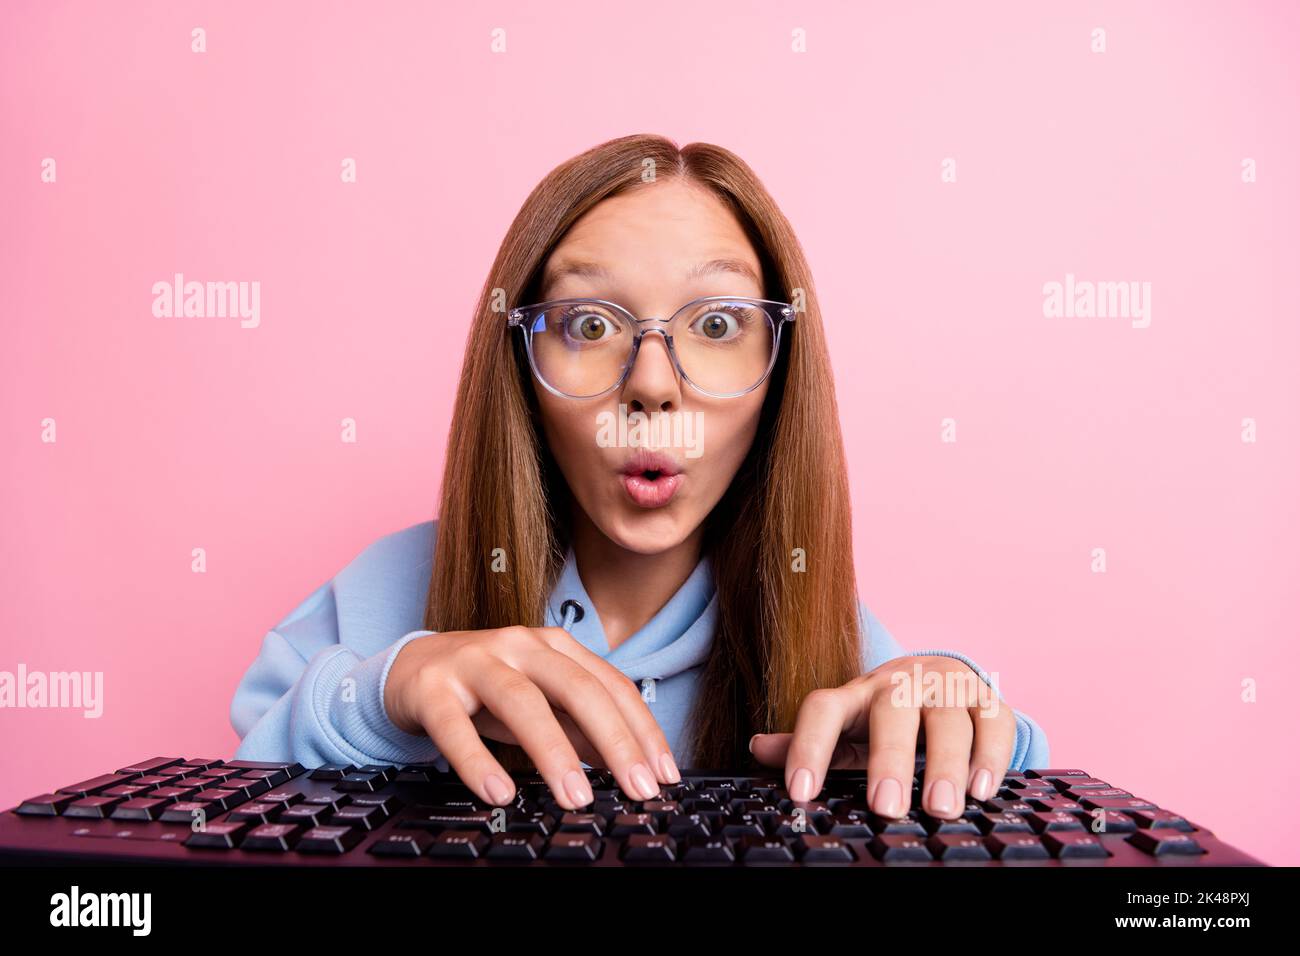 Portrait of crazy impressed person typing keyboard pouted lips staring isolated on pink color background Stock Photo